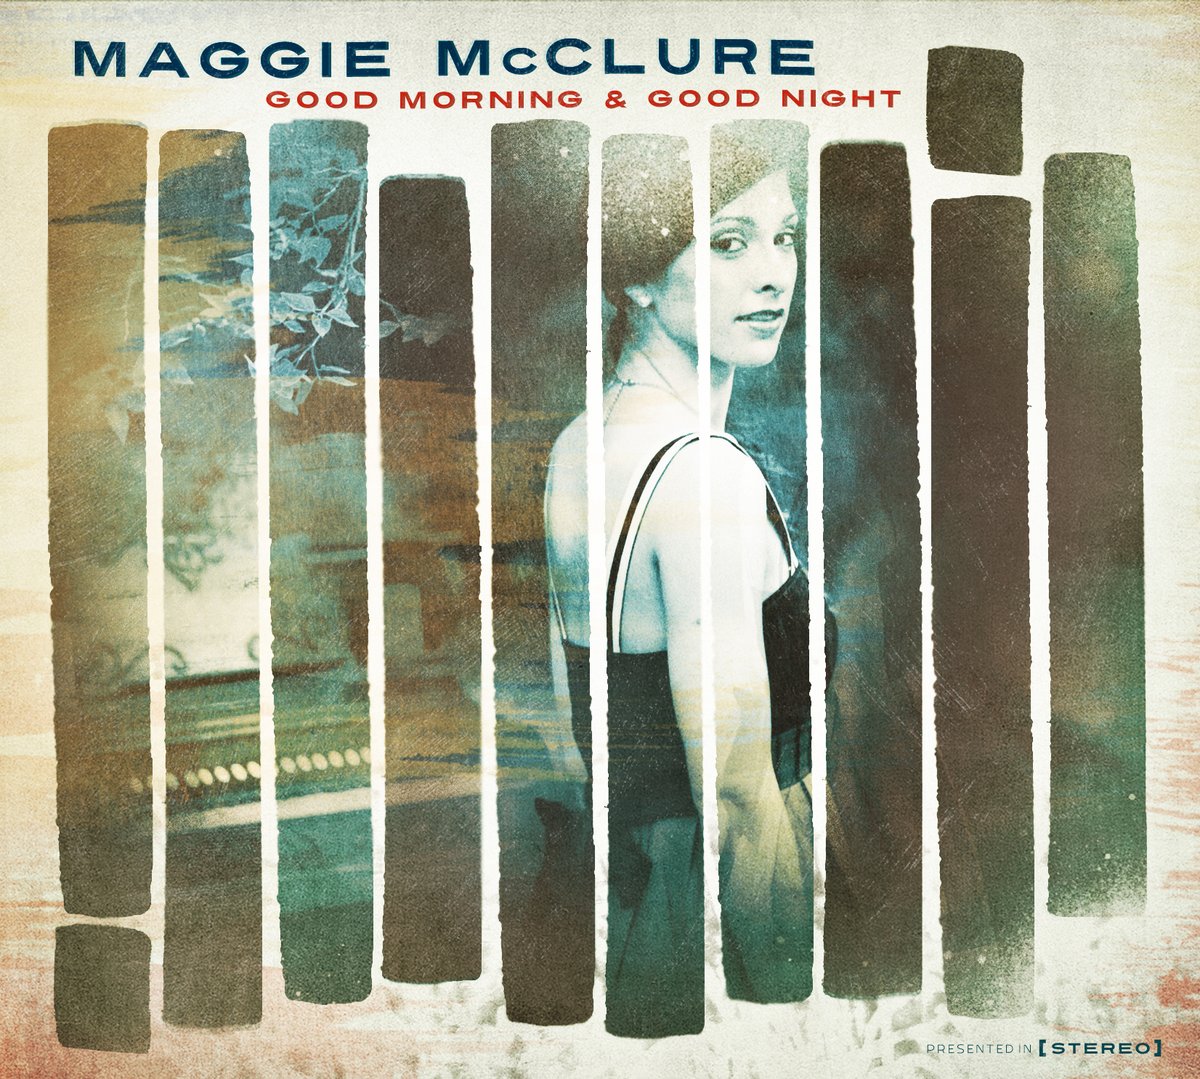 Image of "Good Morning and Good Night" EP by Maggie McClure